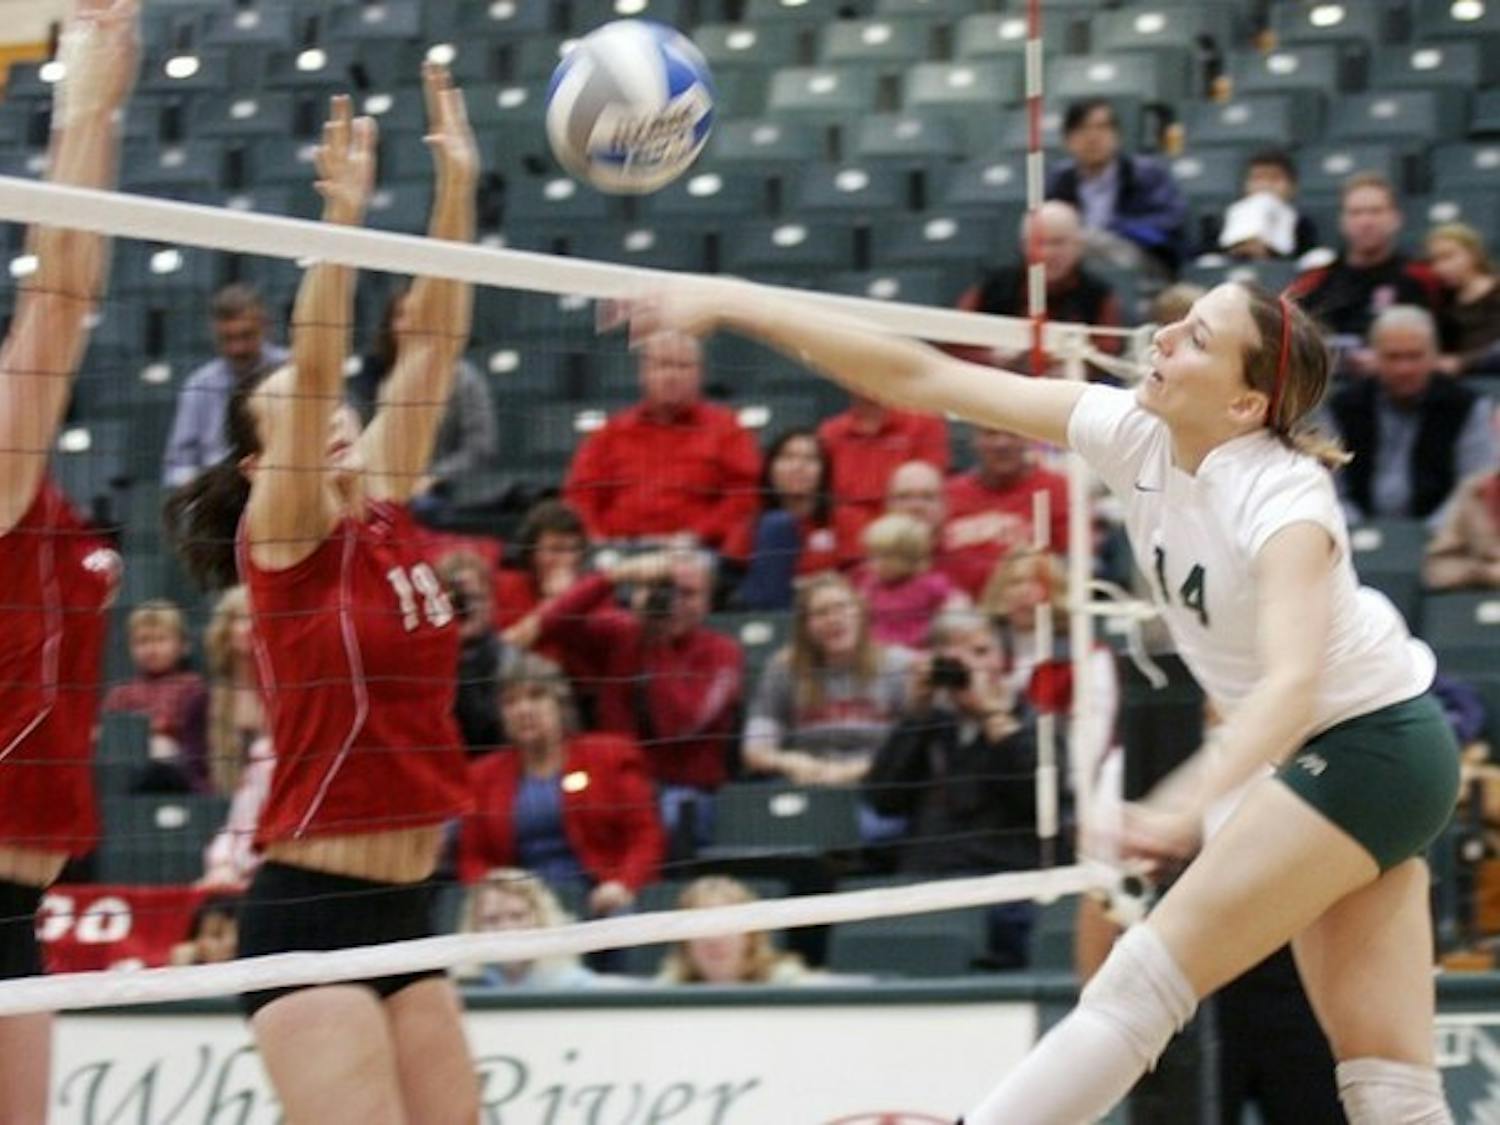 Women's volleyball ends season on high note with win over Brown after the team lost to Yale the previous night.